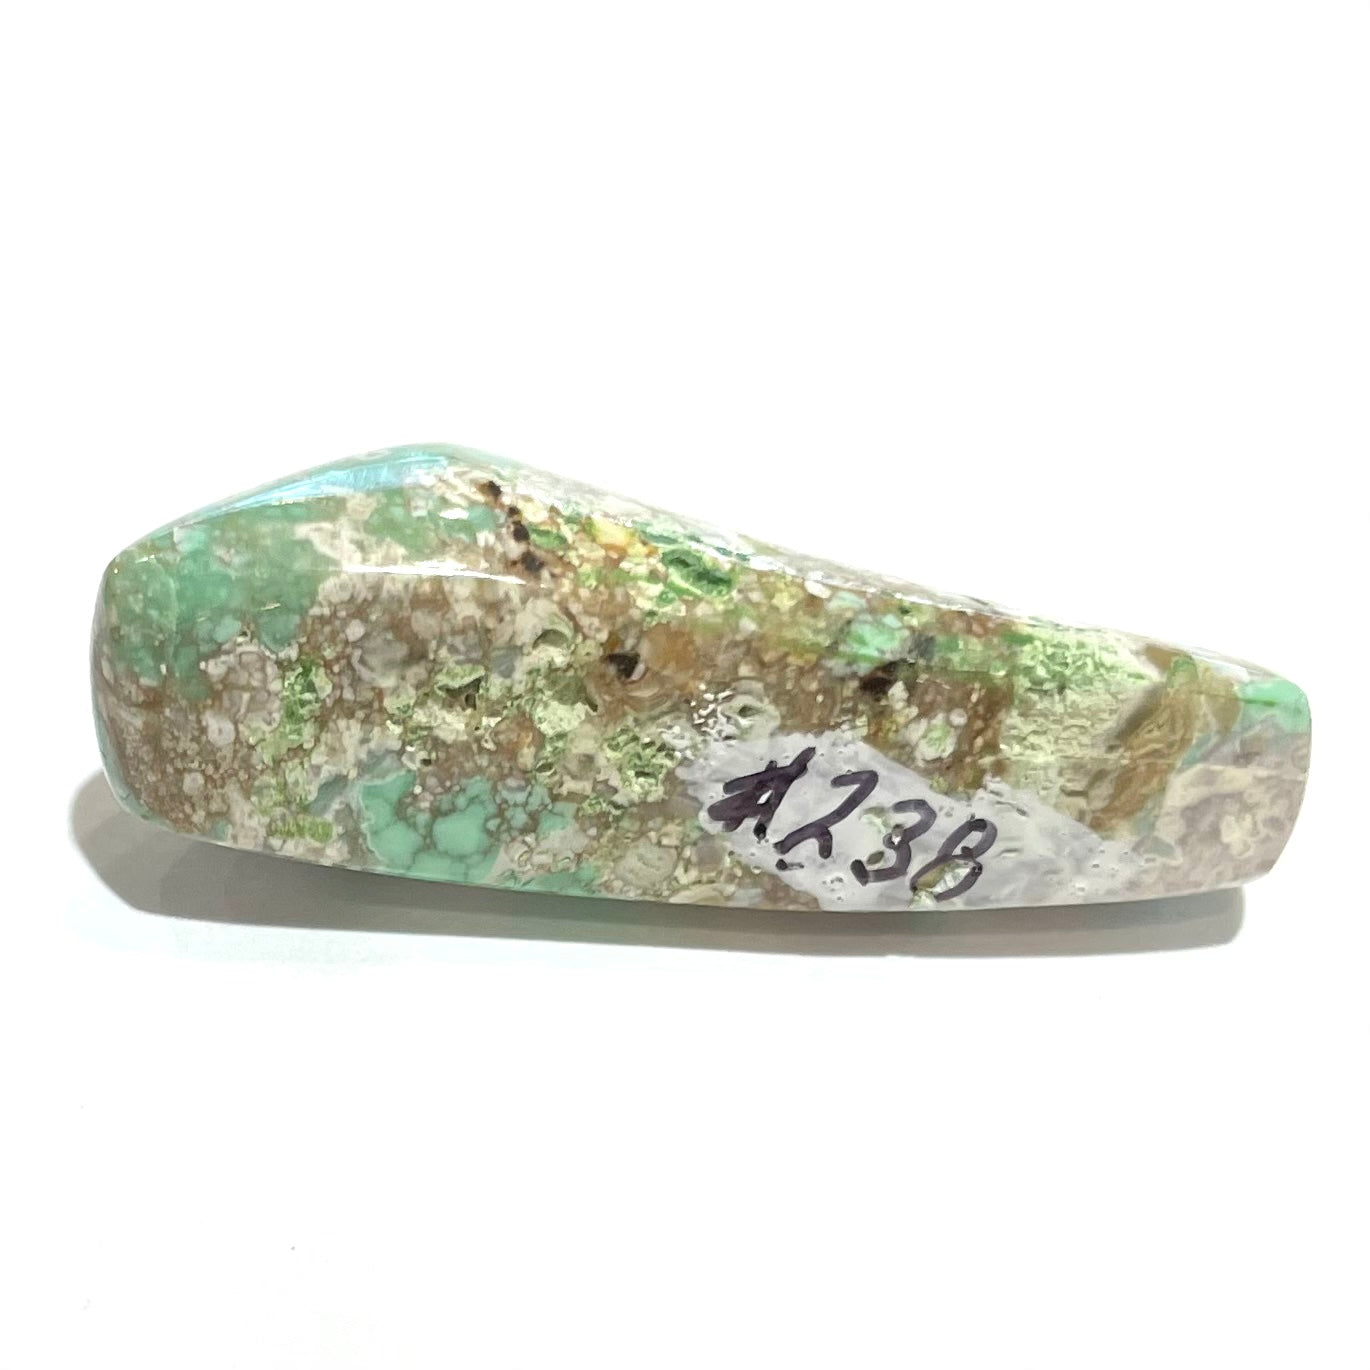 A loose, polished variscite stone from Utah, USA.